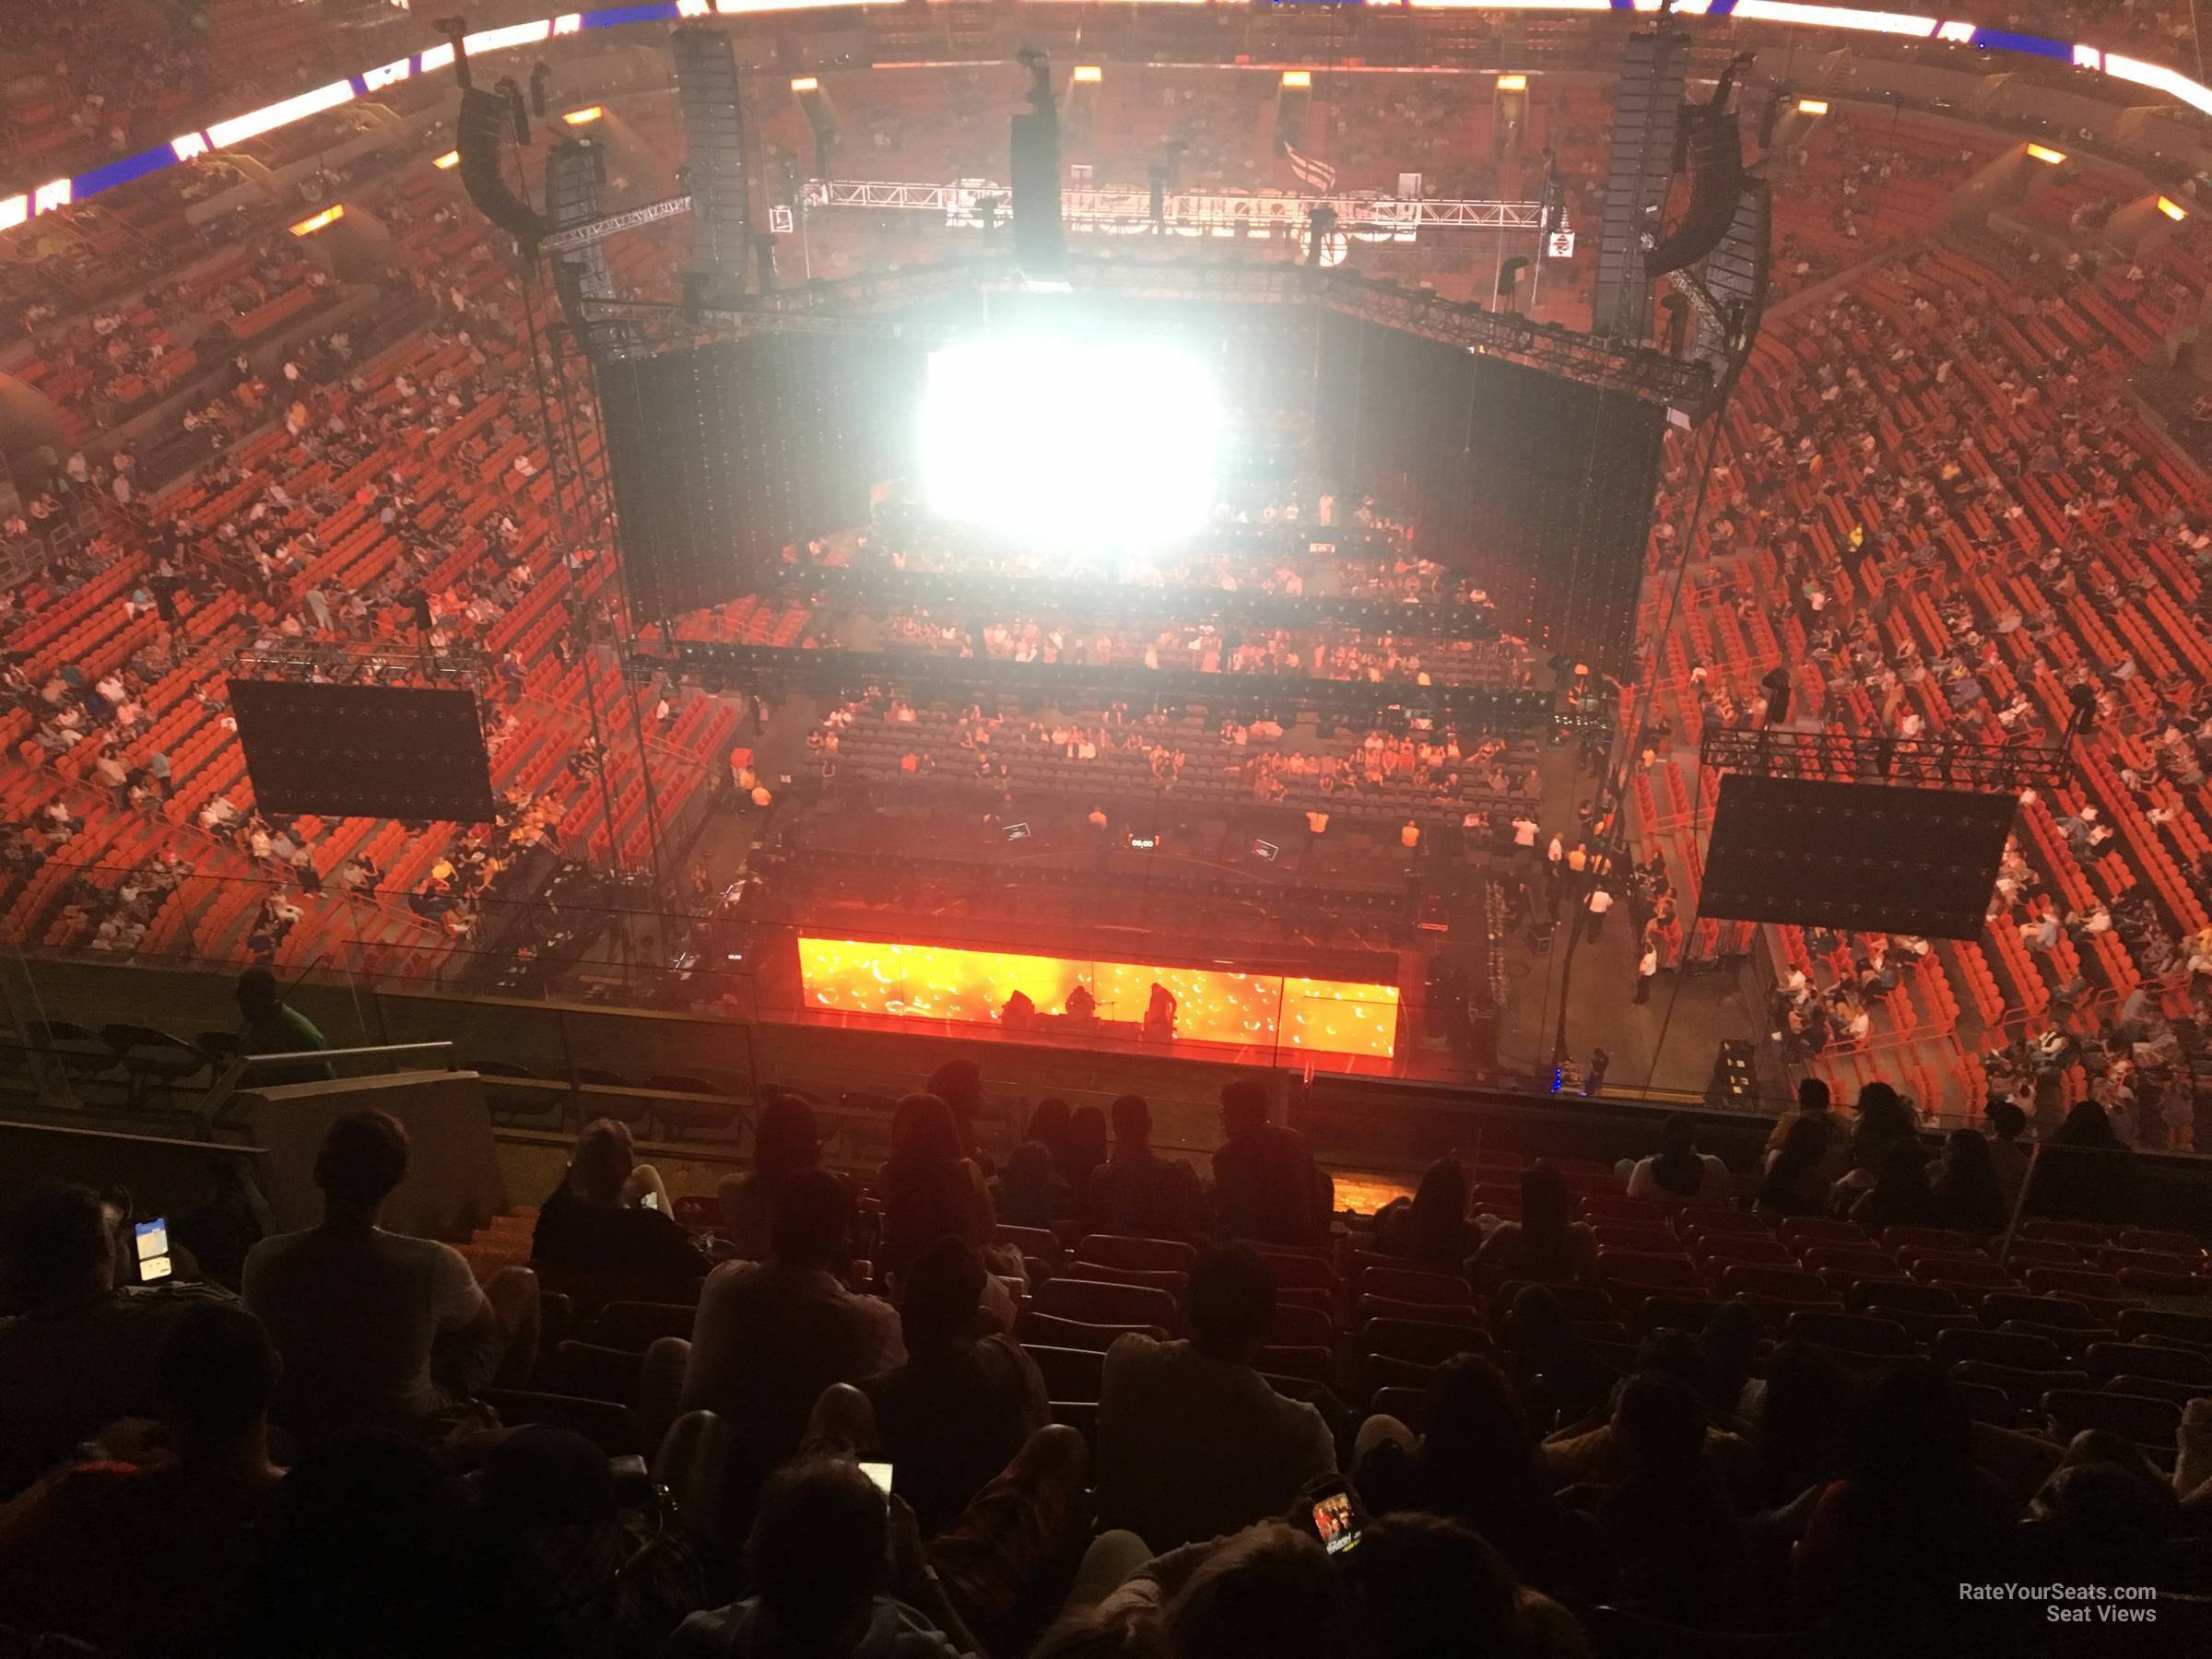 section 405, row 10 seat view  for concert - ftx arena